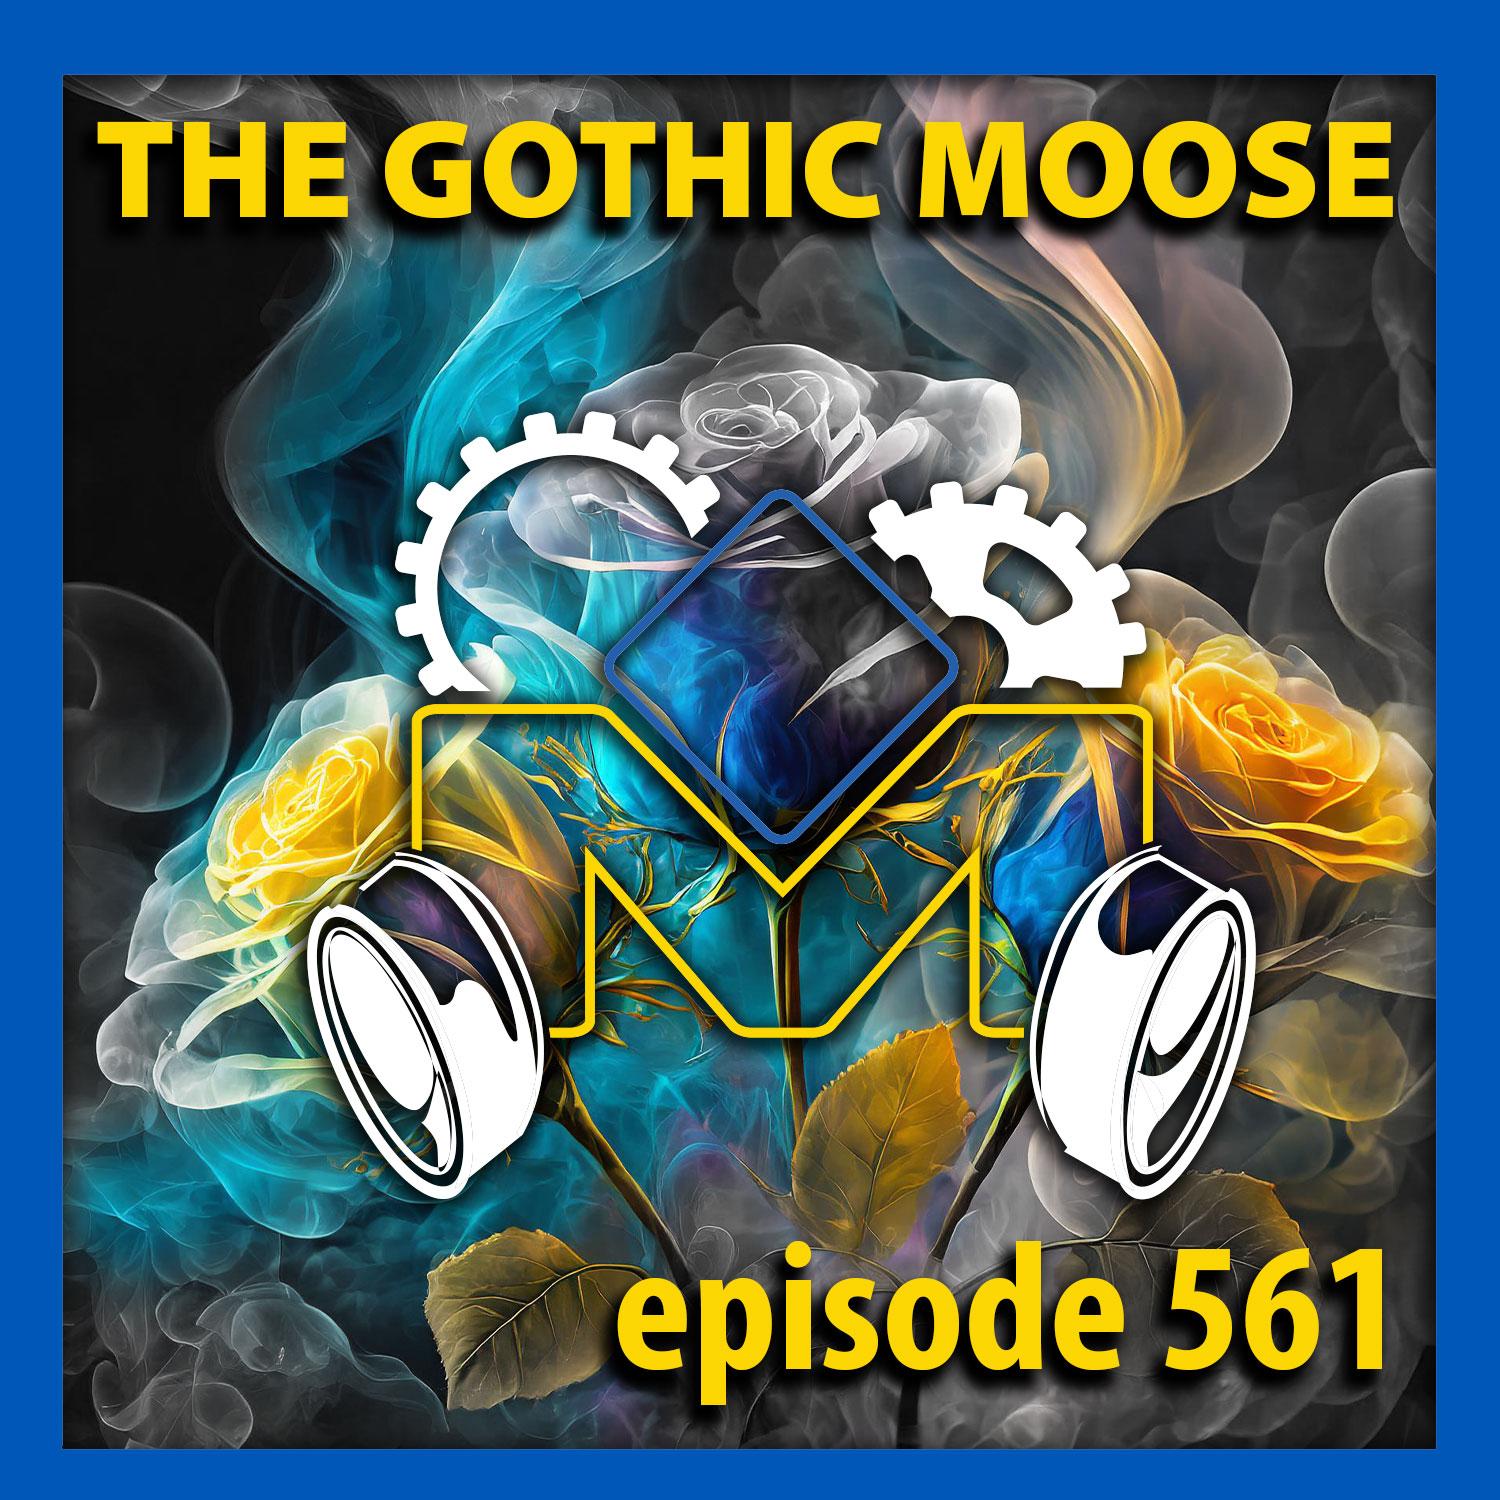 The Gothic Moose – Episode 561 – All Ukrainian bands or bands supporting Ukraine